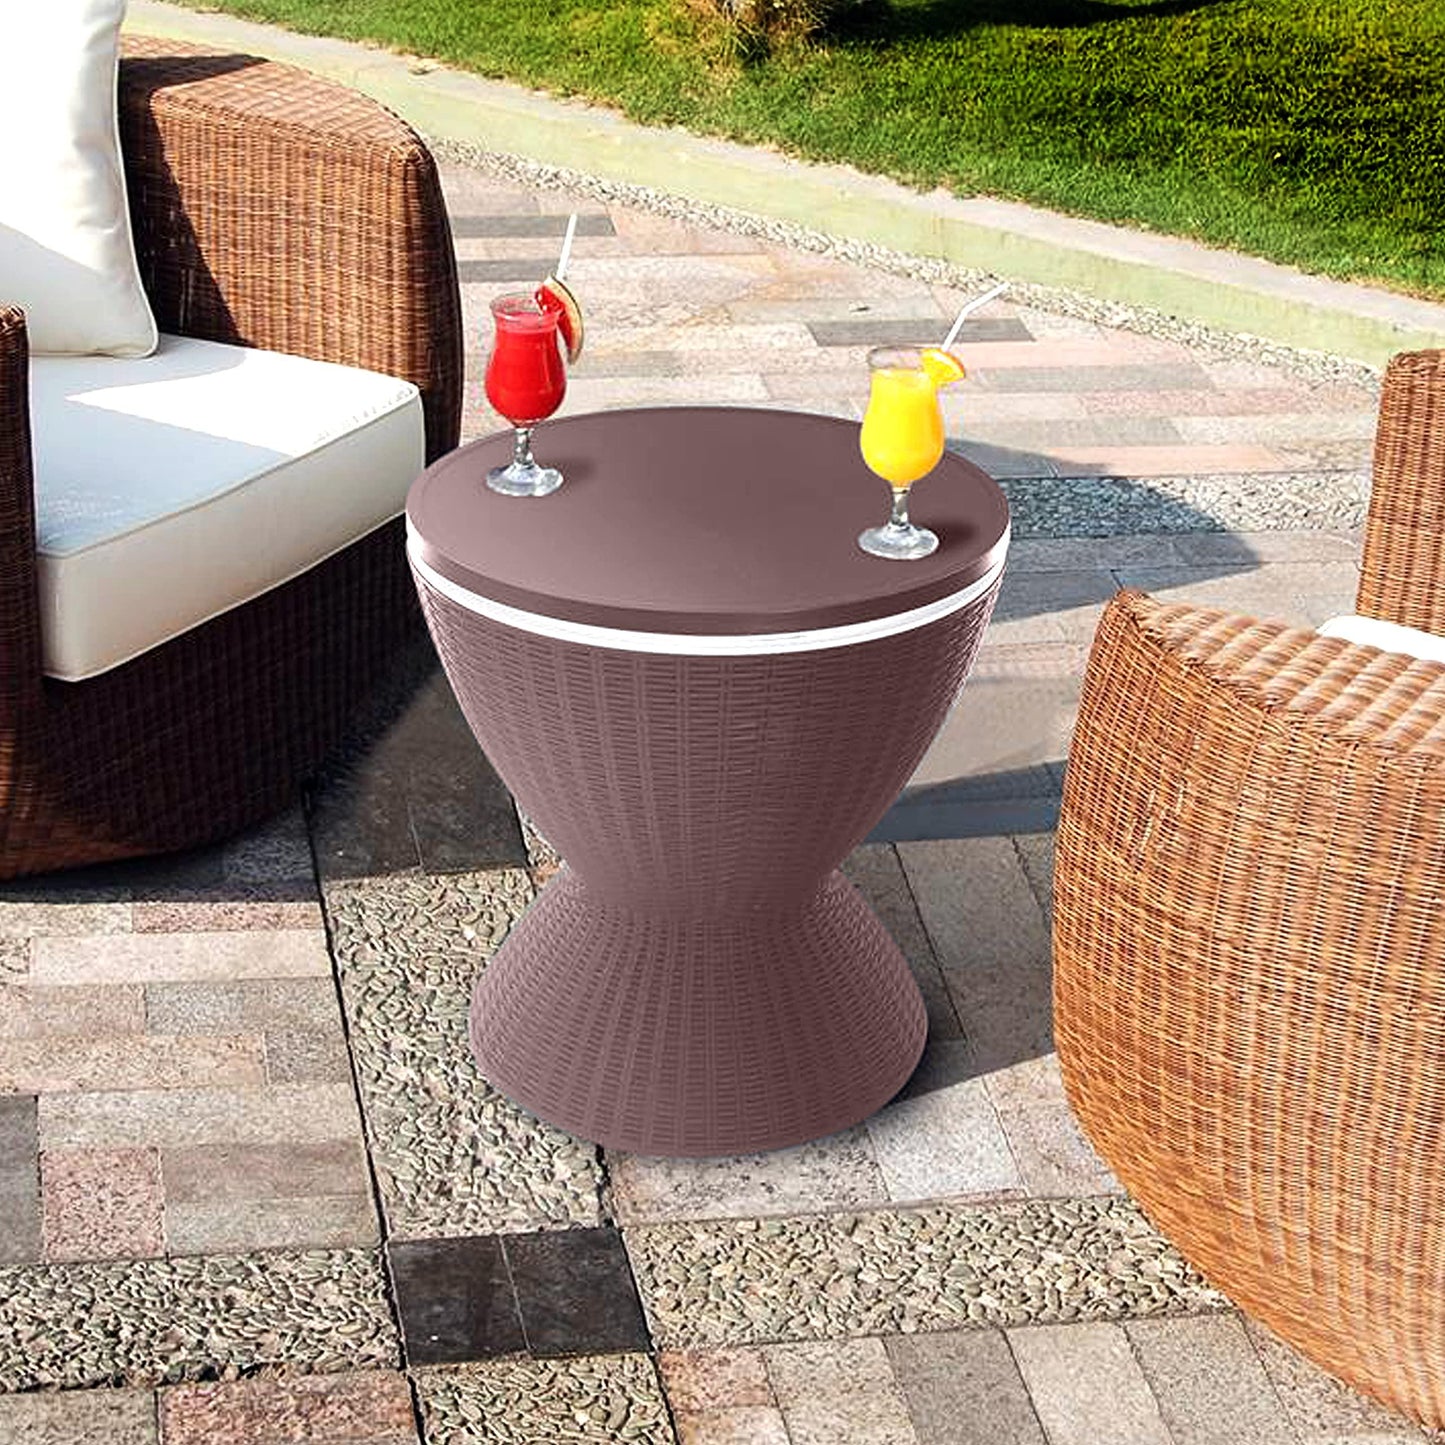 SereneLife Outdoor Cool Bar Table, 7.5 Gallon Beer and Wine Cooler, Patio Furniture & Hot Tub Side Table, Beverage Cooler, All-Weather Resistant Ice Cool Bar, Rattan Style Patio, Cocktail Bar (Grey) - CookCave